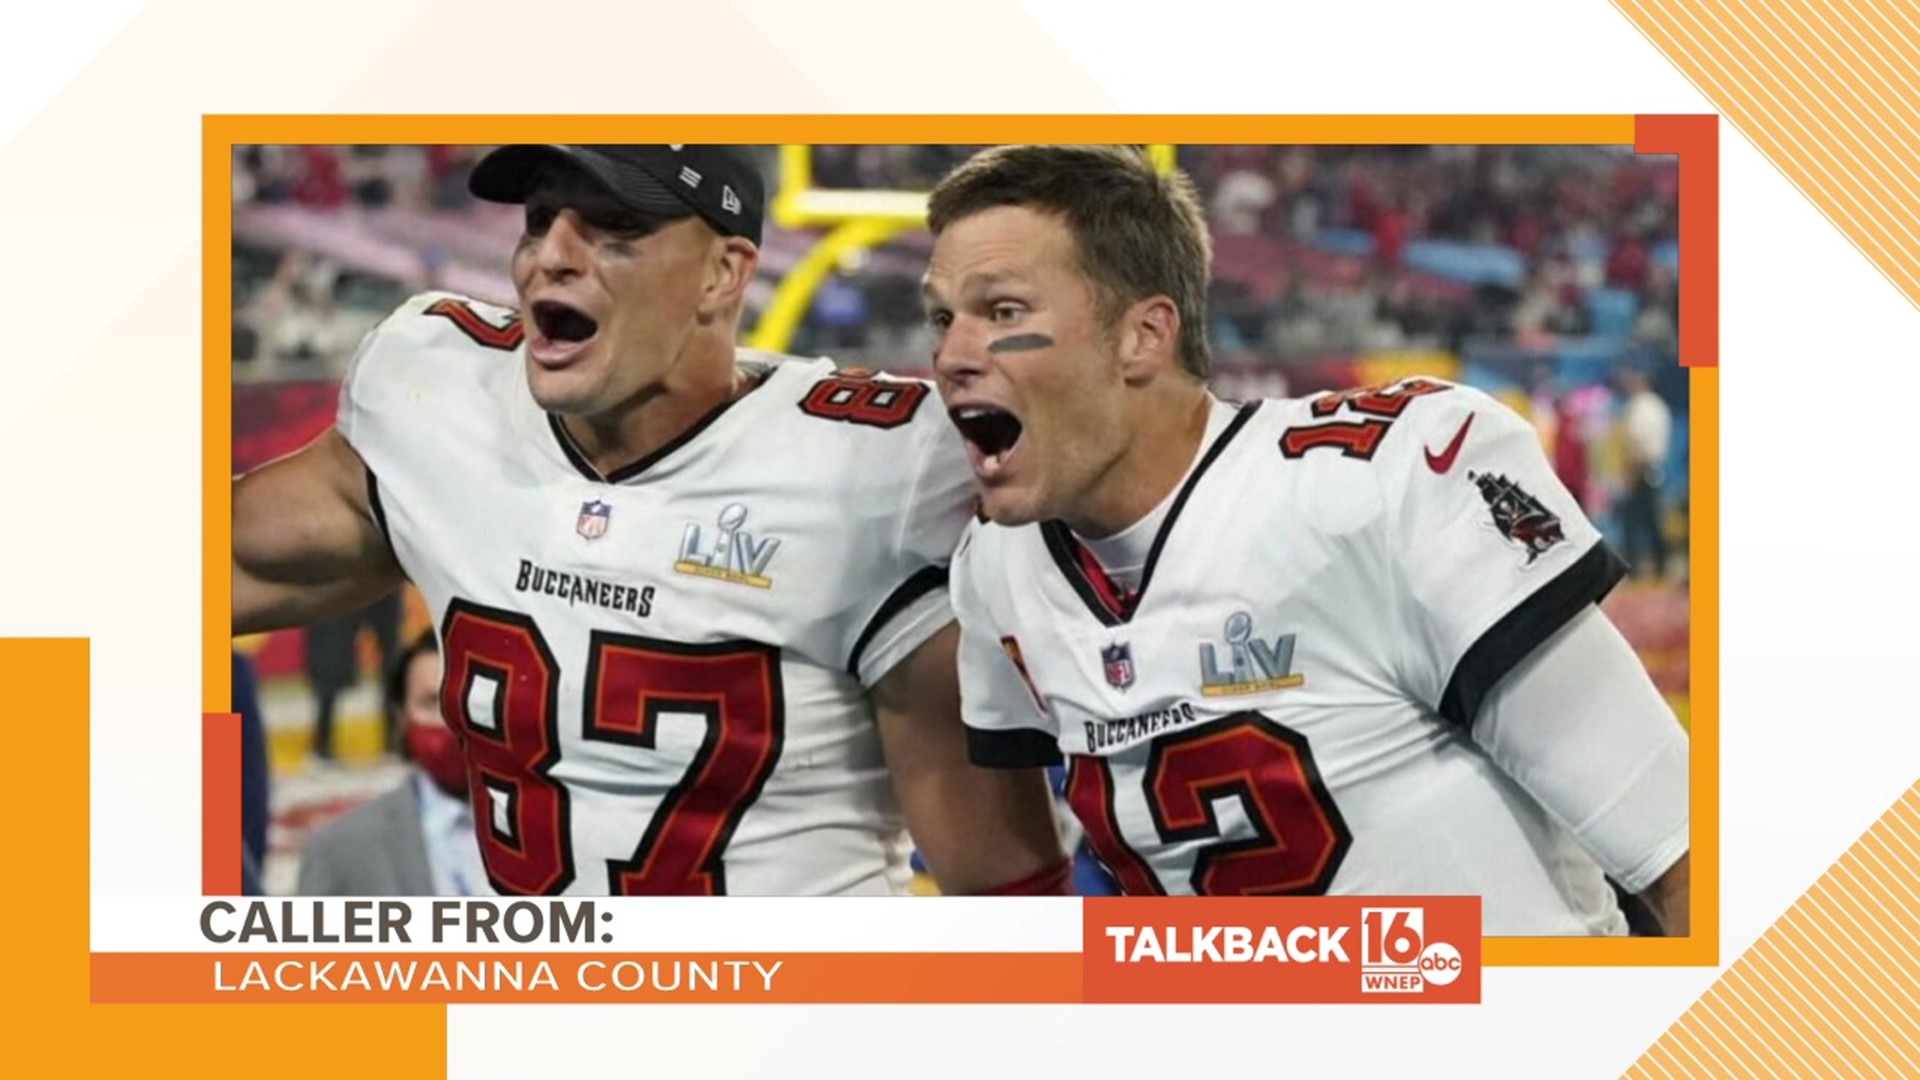 A number of callers respond to yesterday's call about the Tampa Bay Buccaneers quarterback.